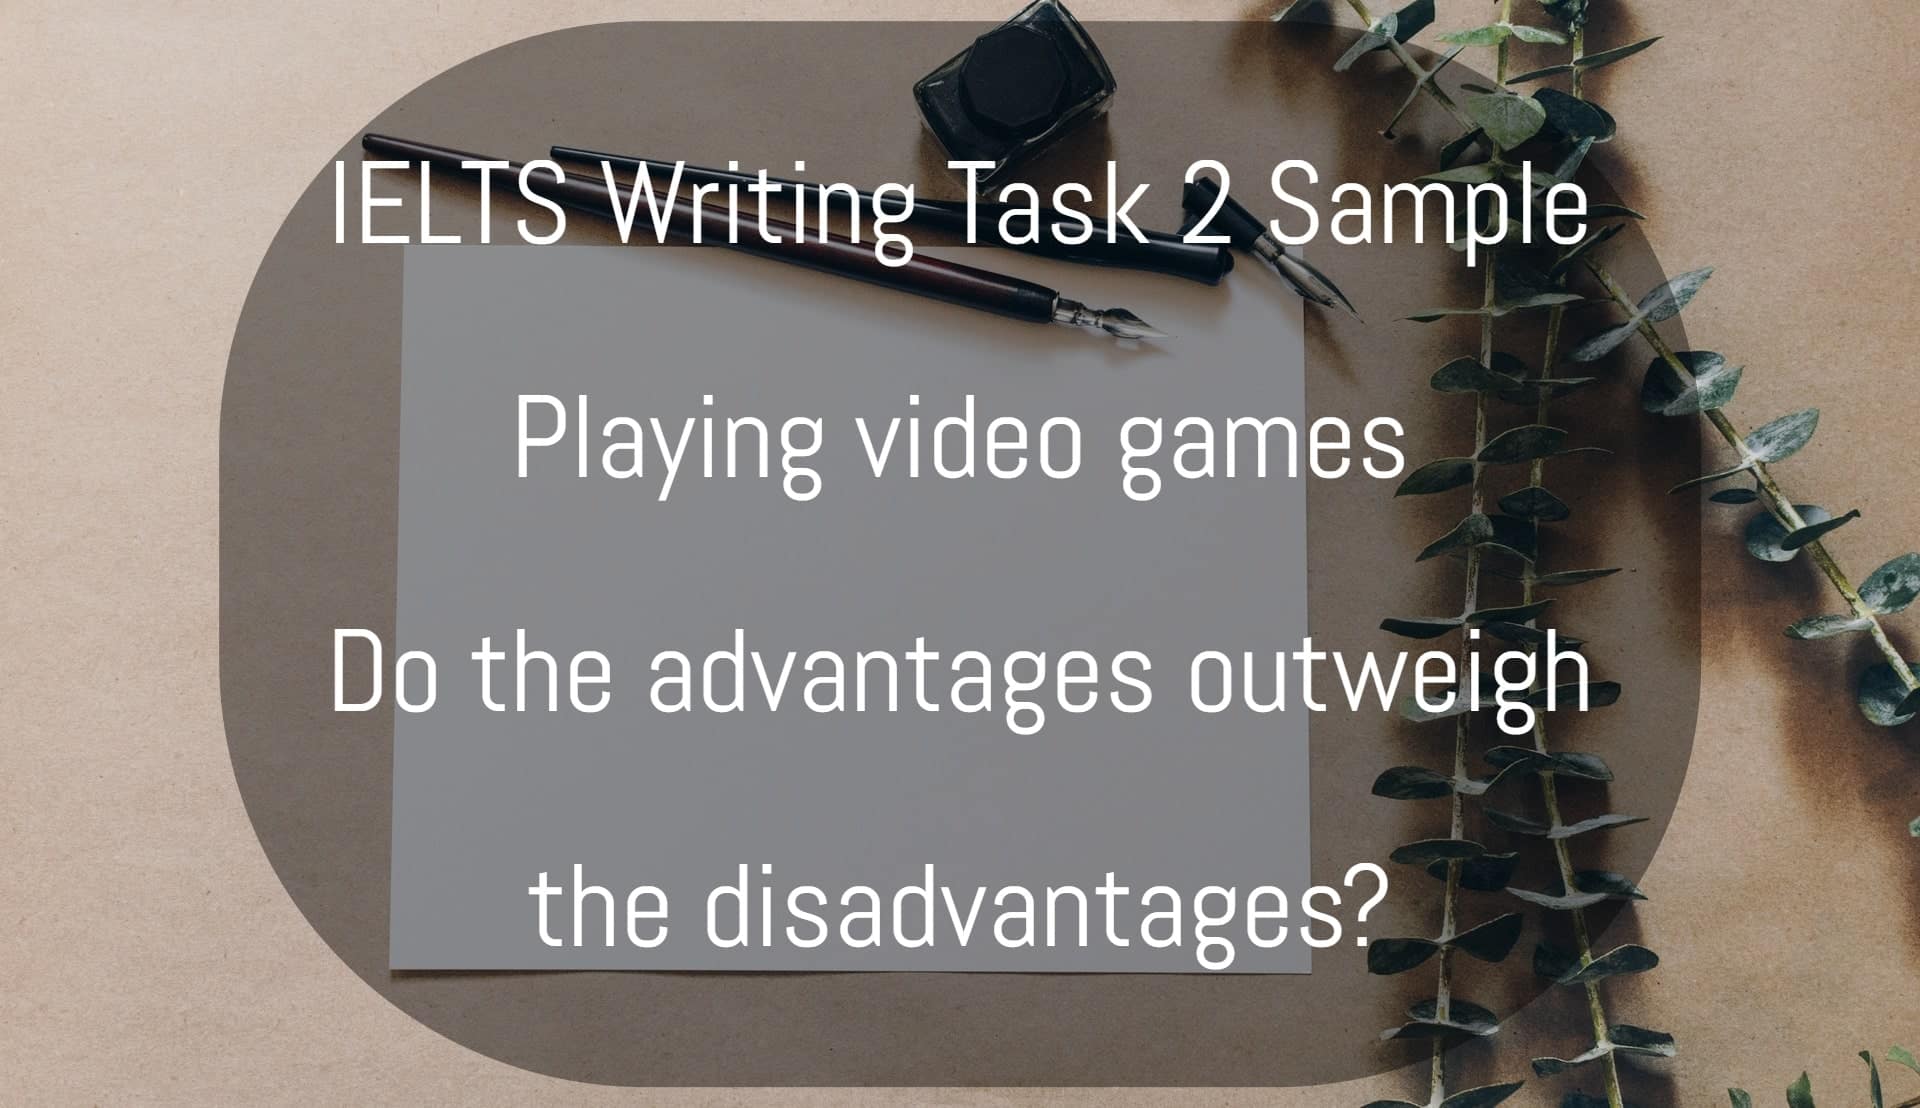 IELTS writing sample playing video games